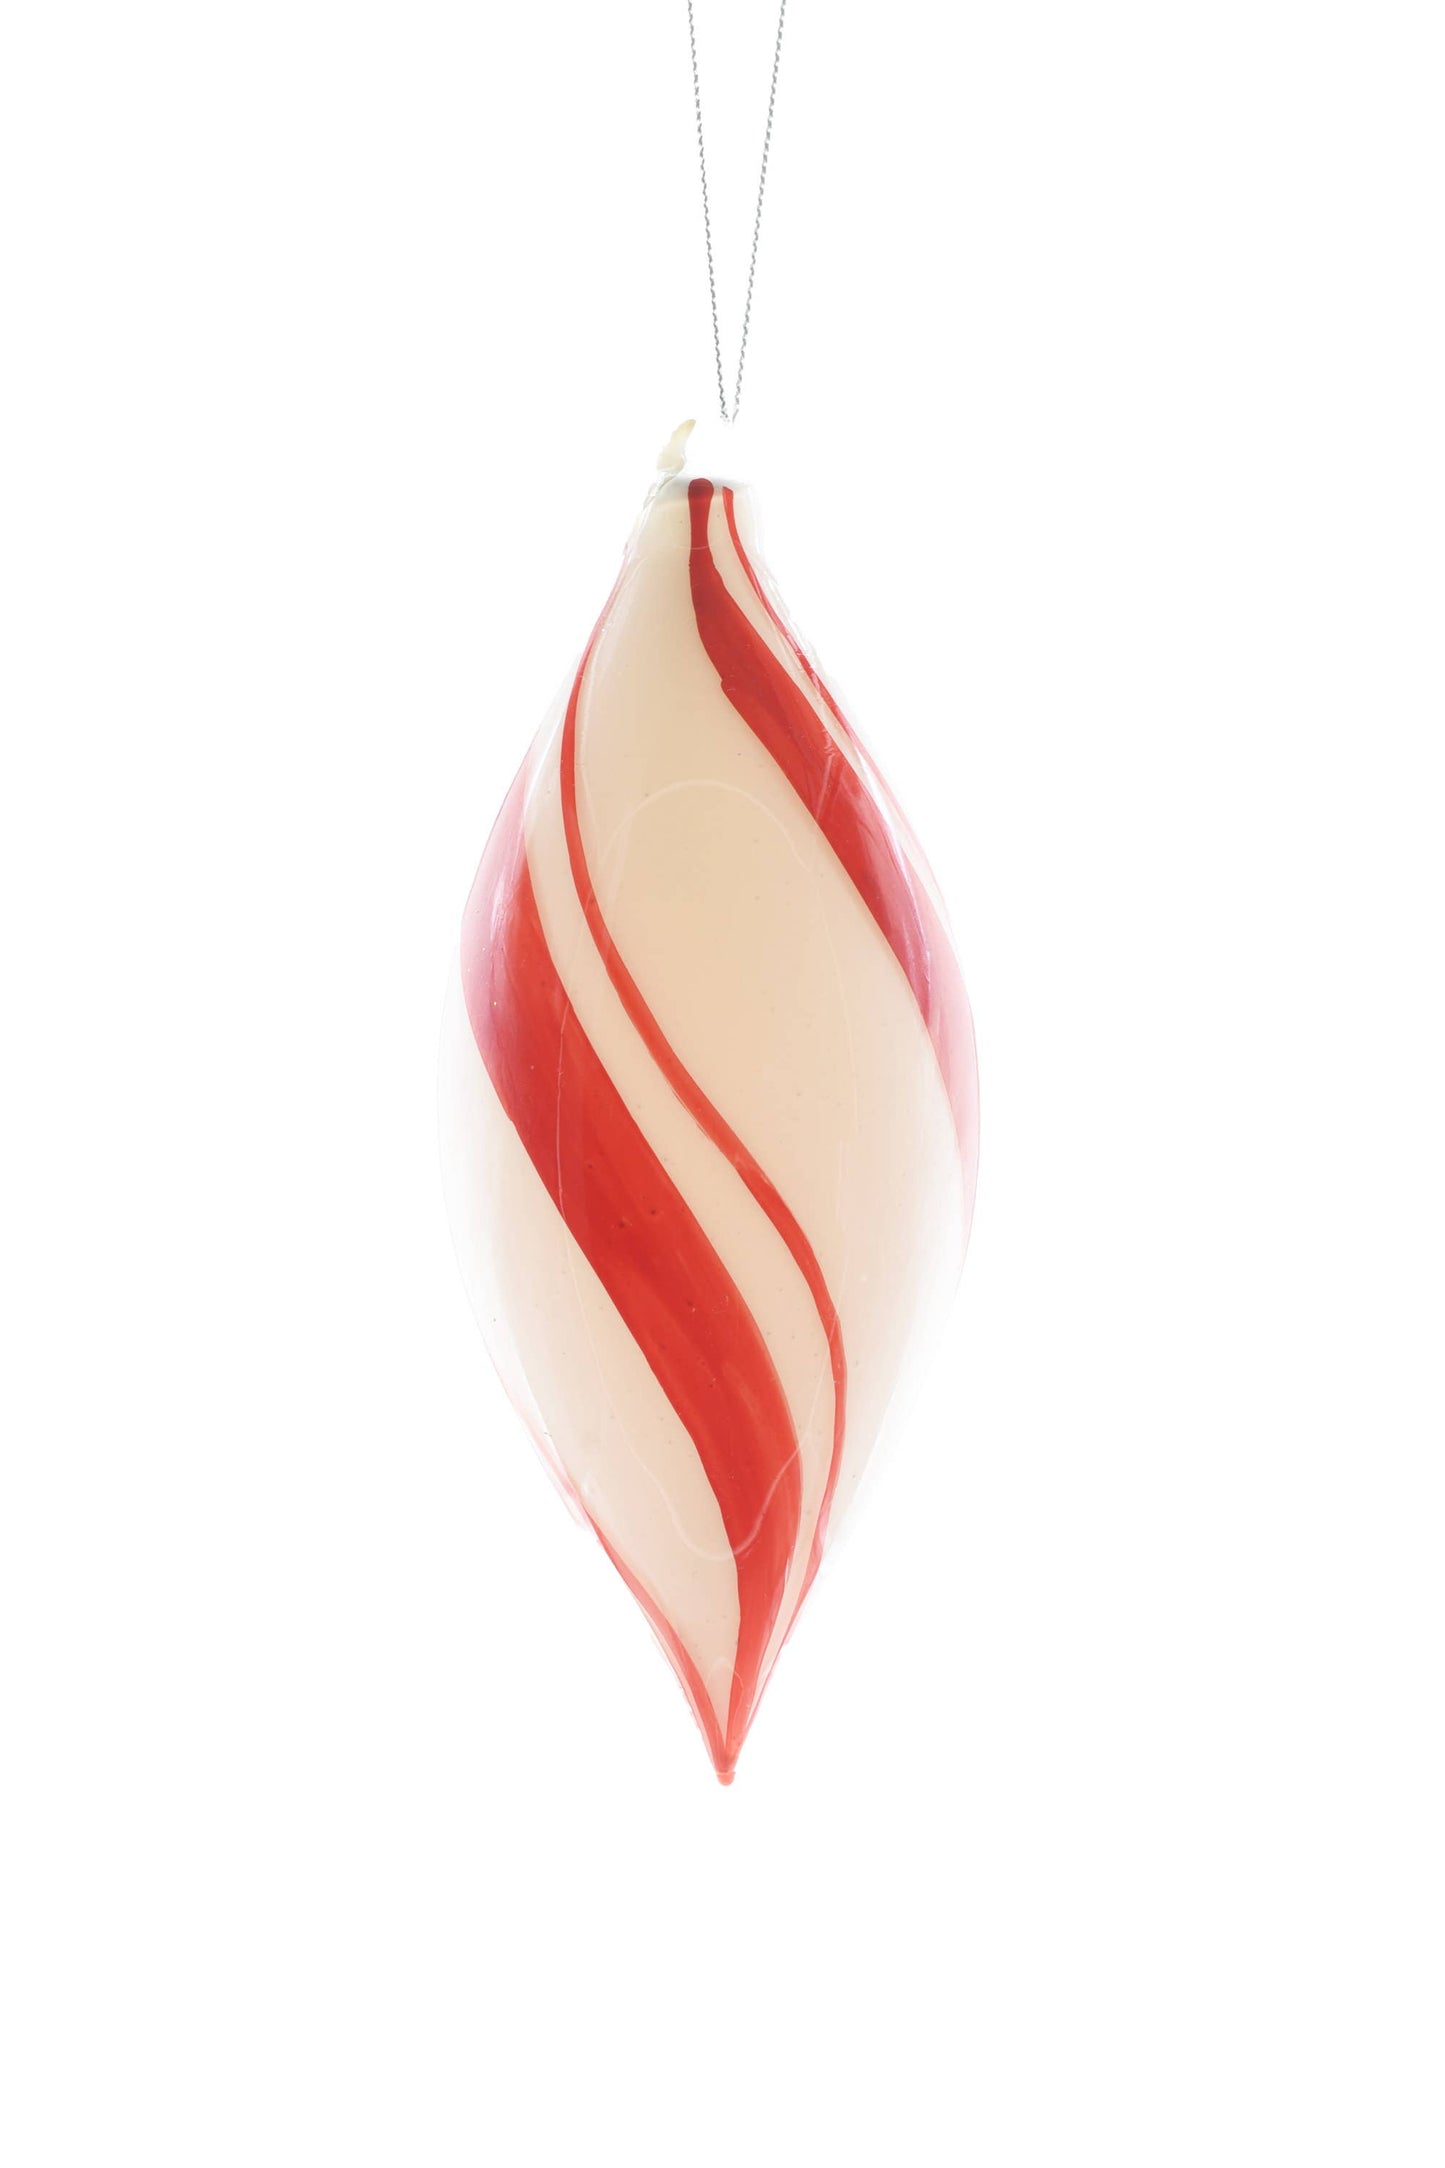 NEW - White Hanging Candy Cane Finial Ornament